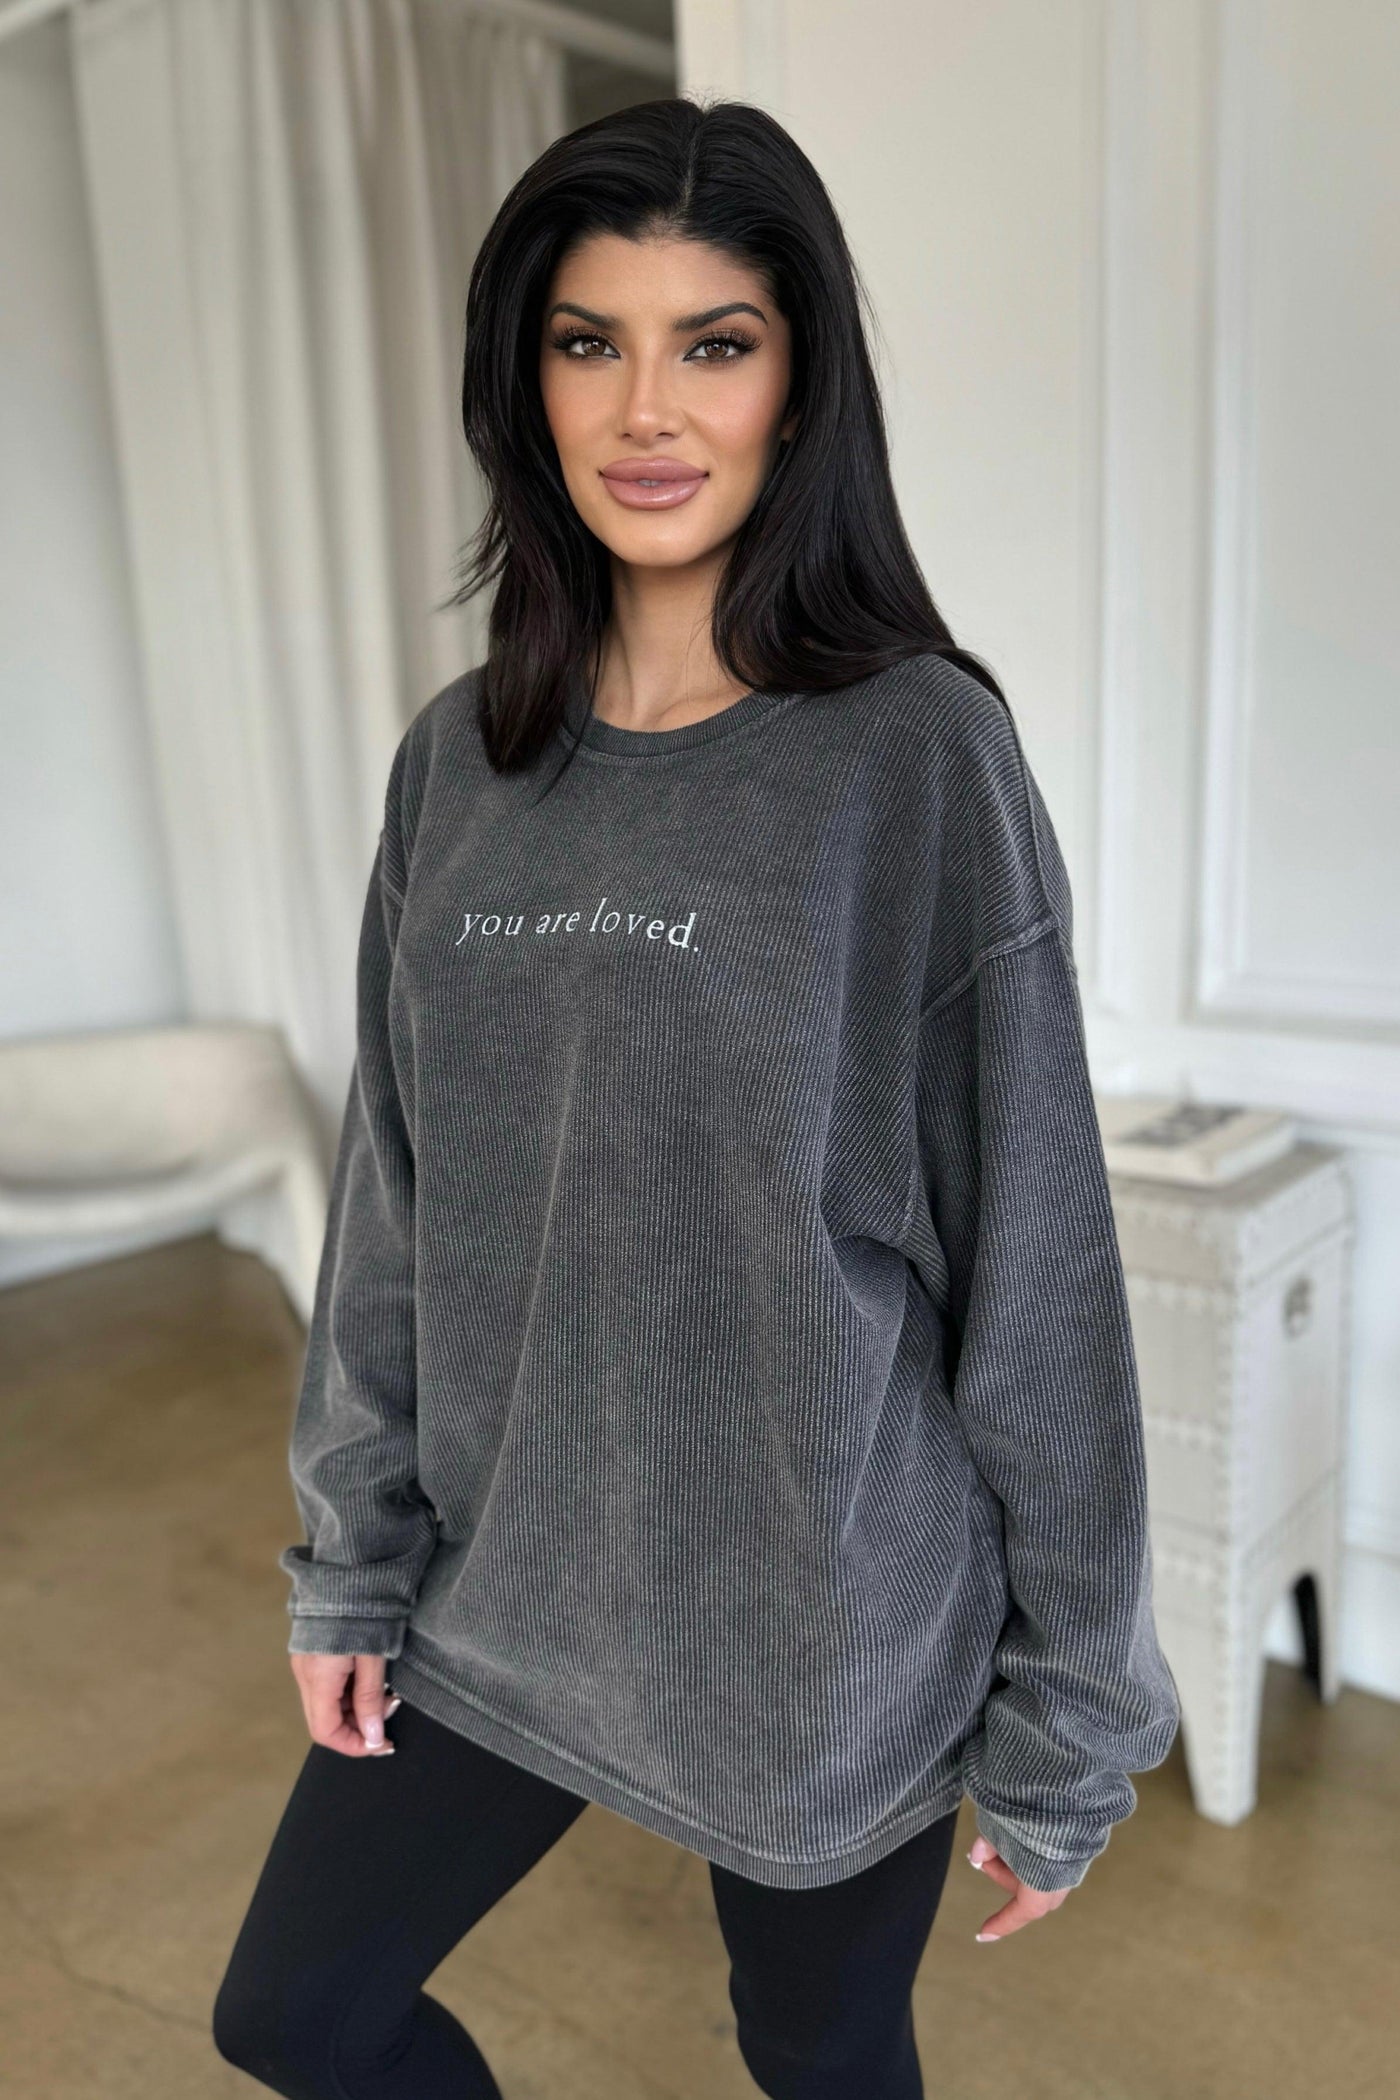 YOU ARE LOVED PULLOVER (PLUS AVAILABLE) , graphic pulllover , it’sNOMB. The Label , GRAPHIC, GRAPHIC PULLOVER, graphic sweathsirts, graphic sweatshirt, GRAY, GREY, YOU ARE LOVED GRAPHIC THERMAL , It's NOMB , itsnomb.com